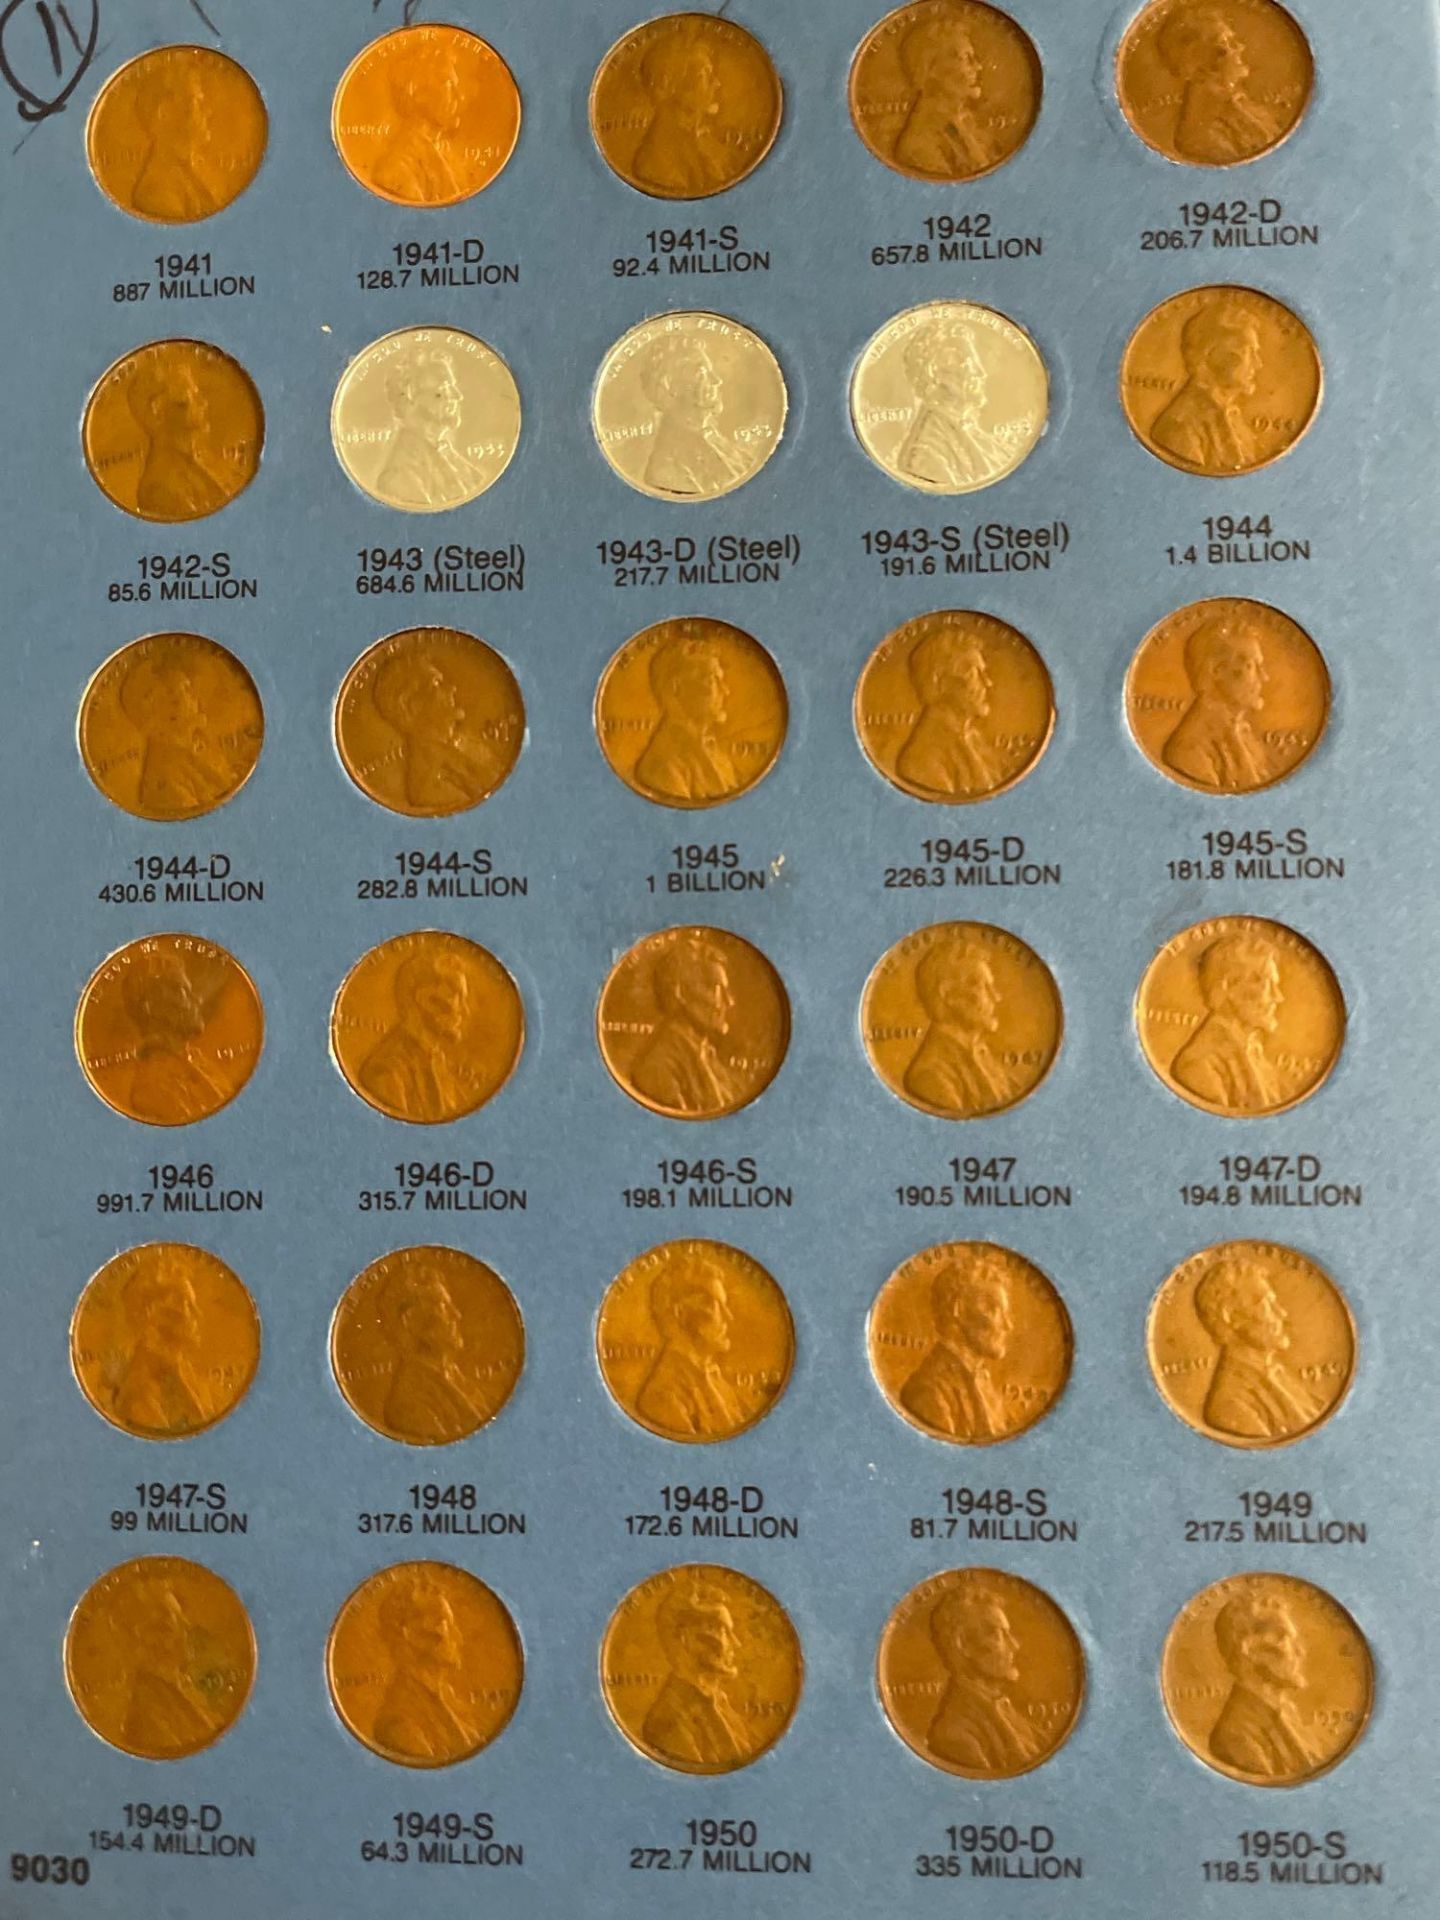 Lincoln Cents 1941 to 1974 #2 - Image 4 of 6